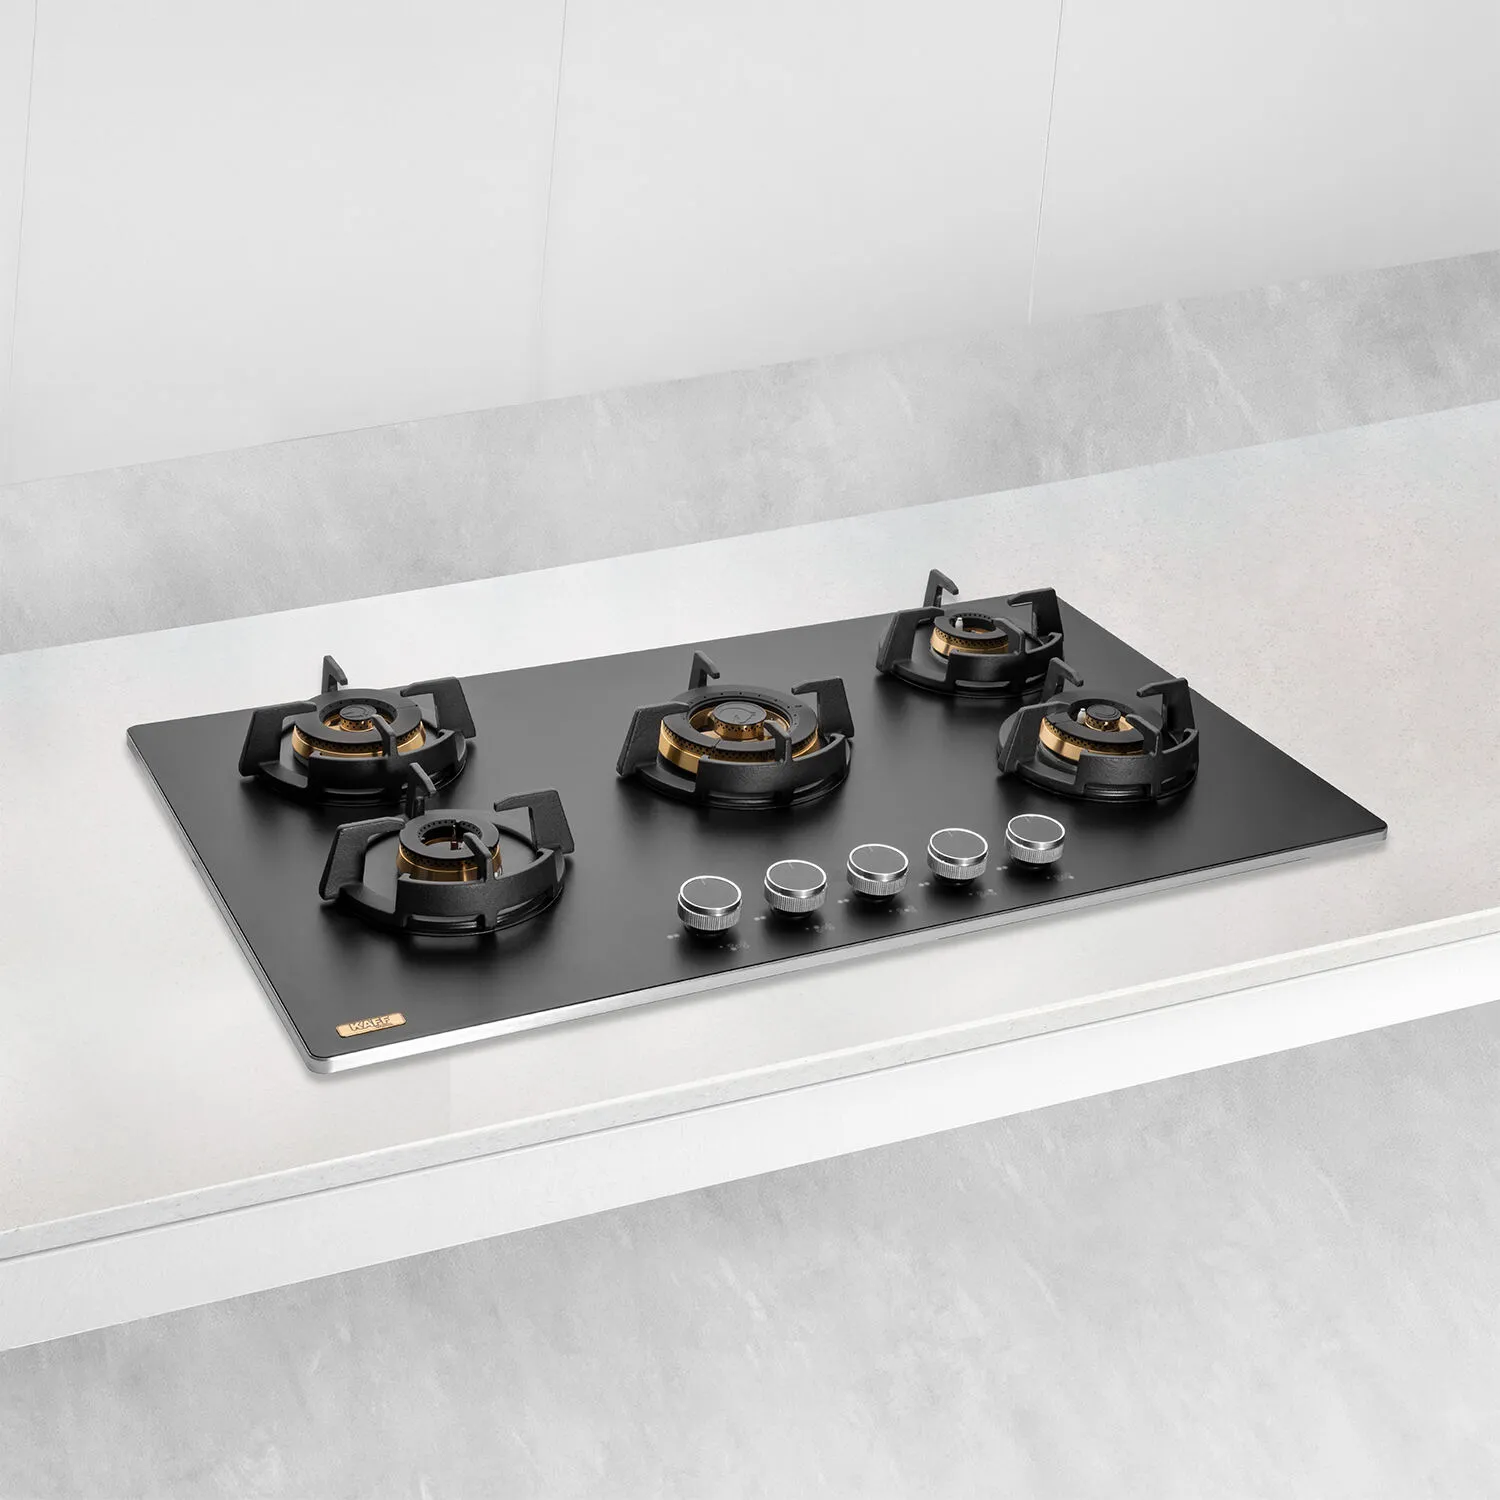 KAFF built-in hobs with brass burners and flame failure device